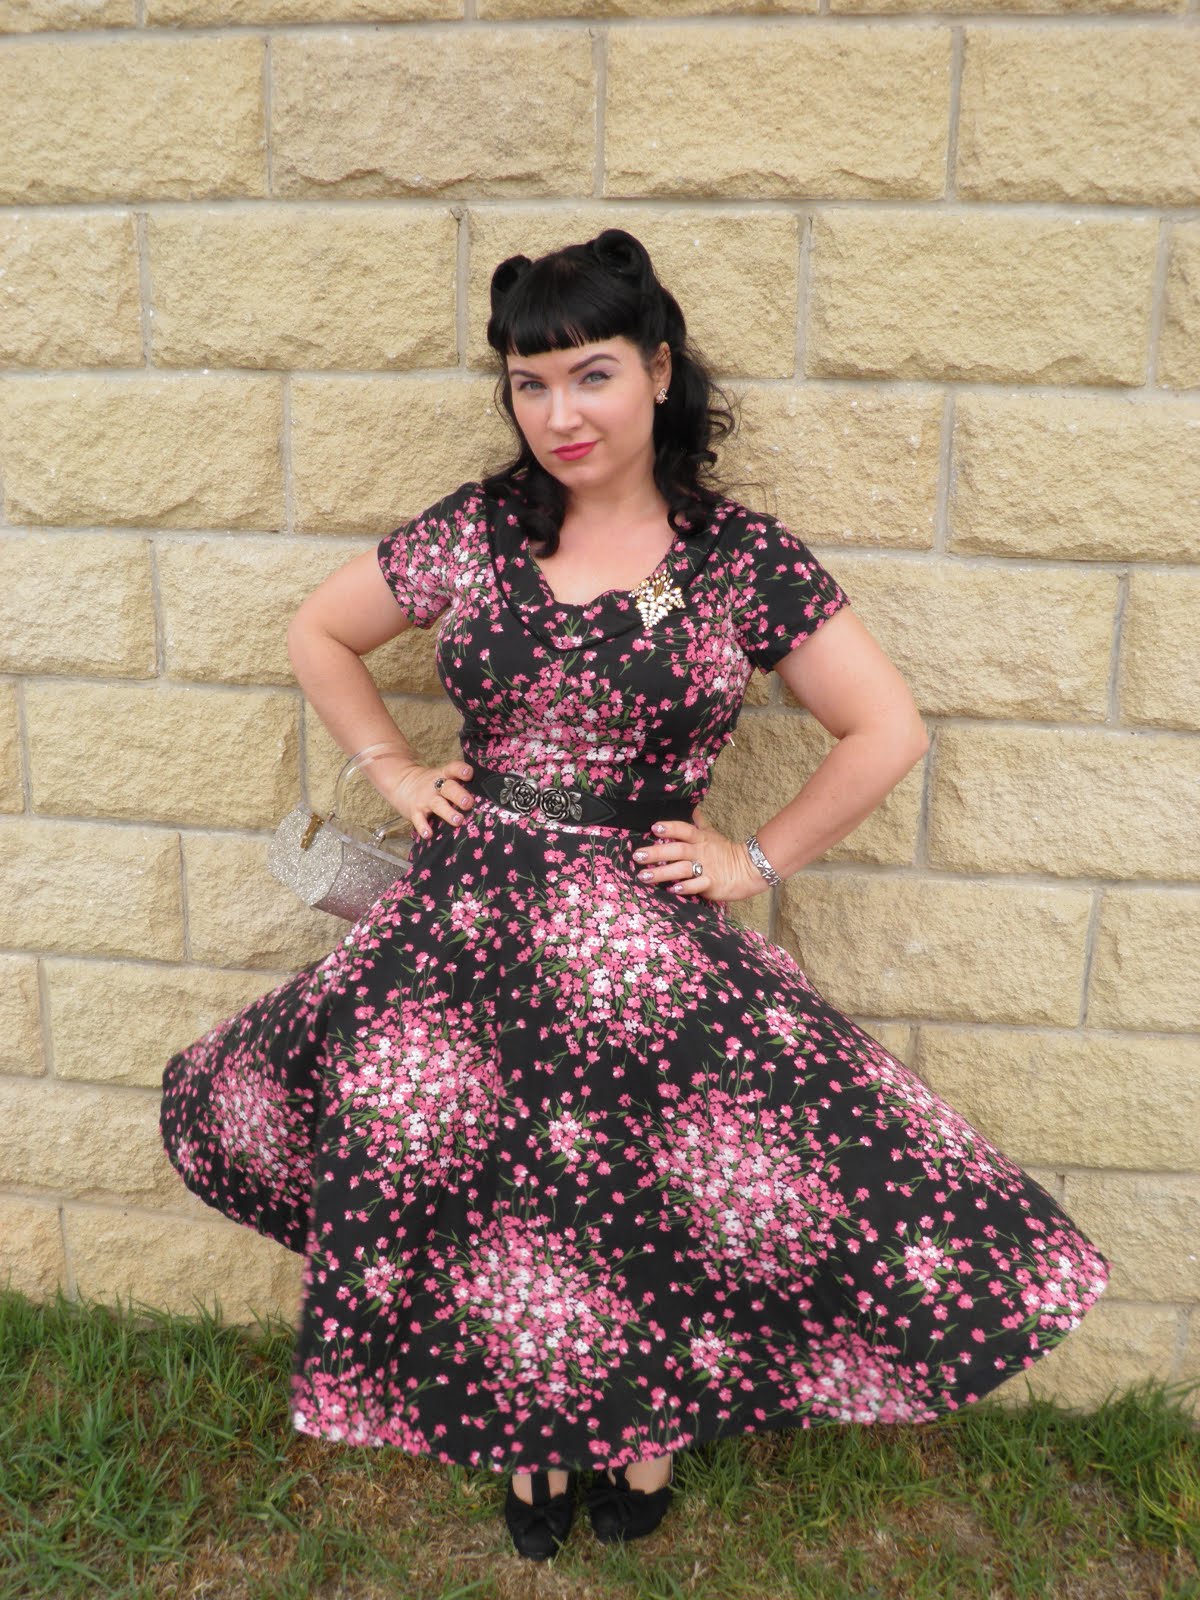 Vintage Musings Of A Modern Pinup: February 2012